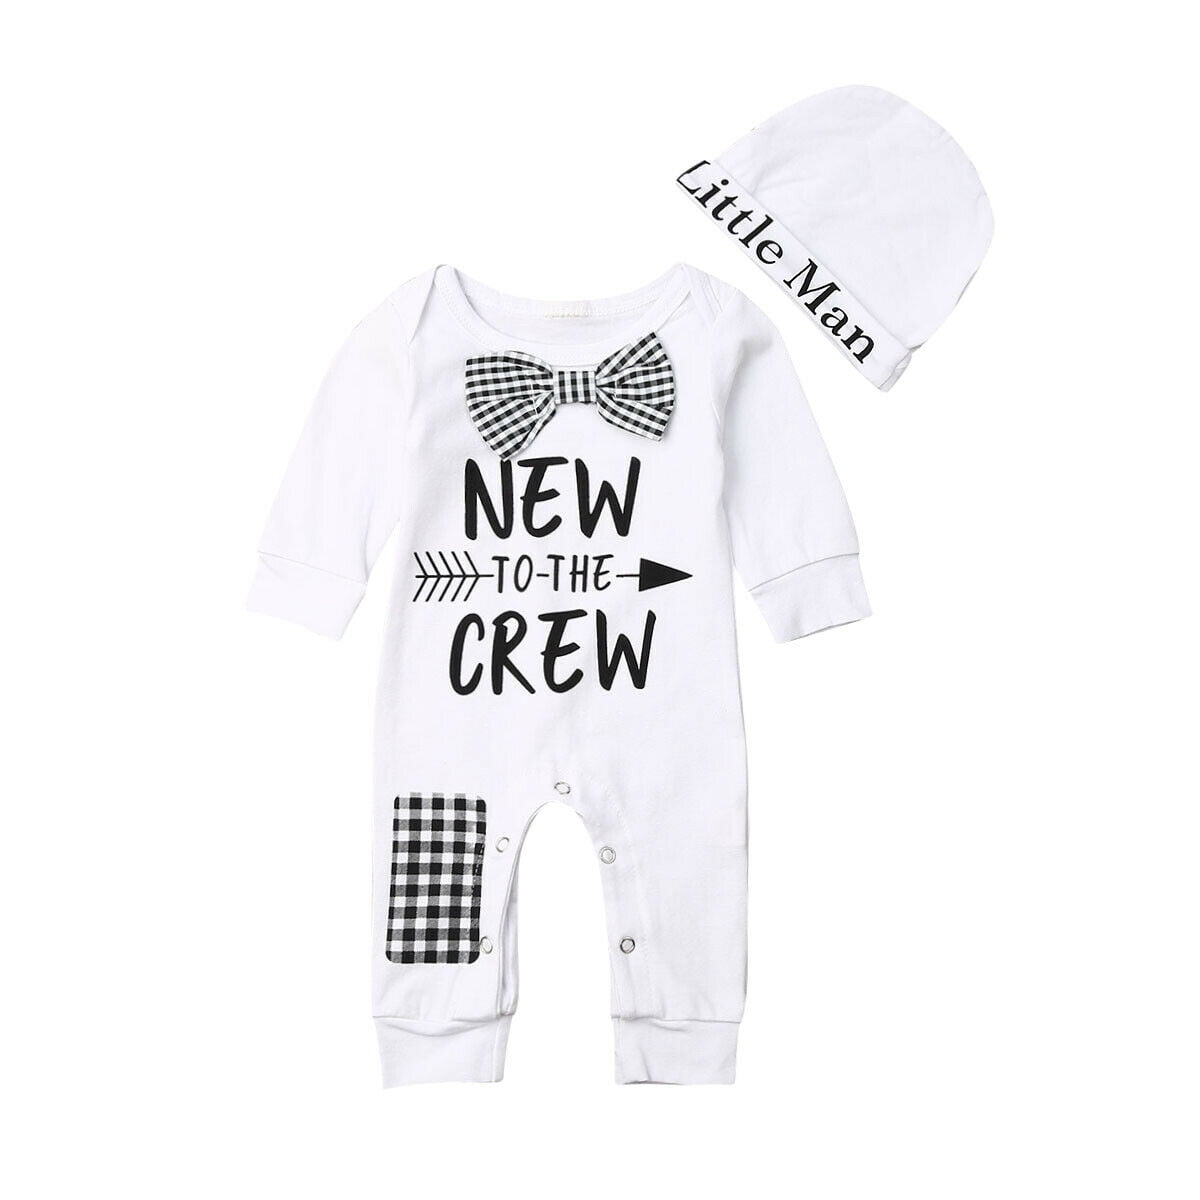 baby hospital clothes cotton white bodysuit hat and blanket Newborn outfit 